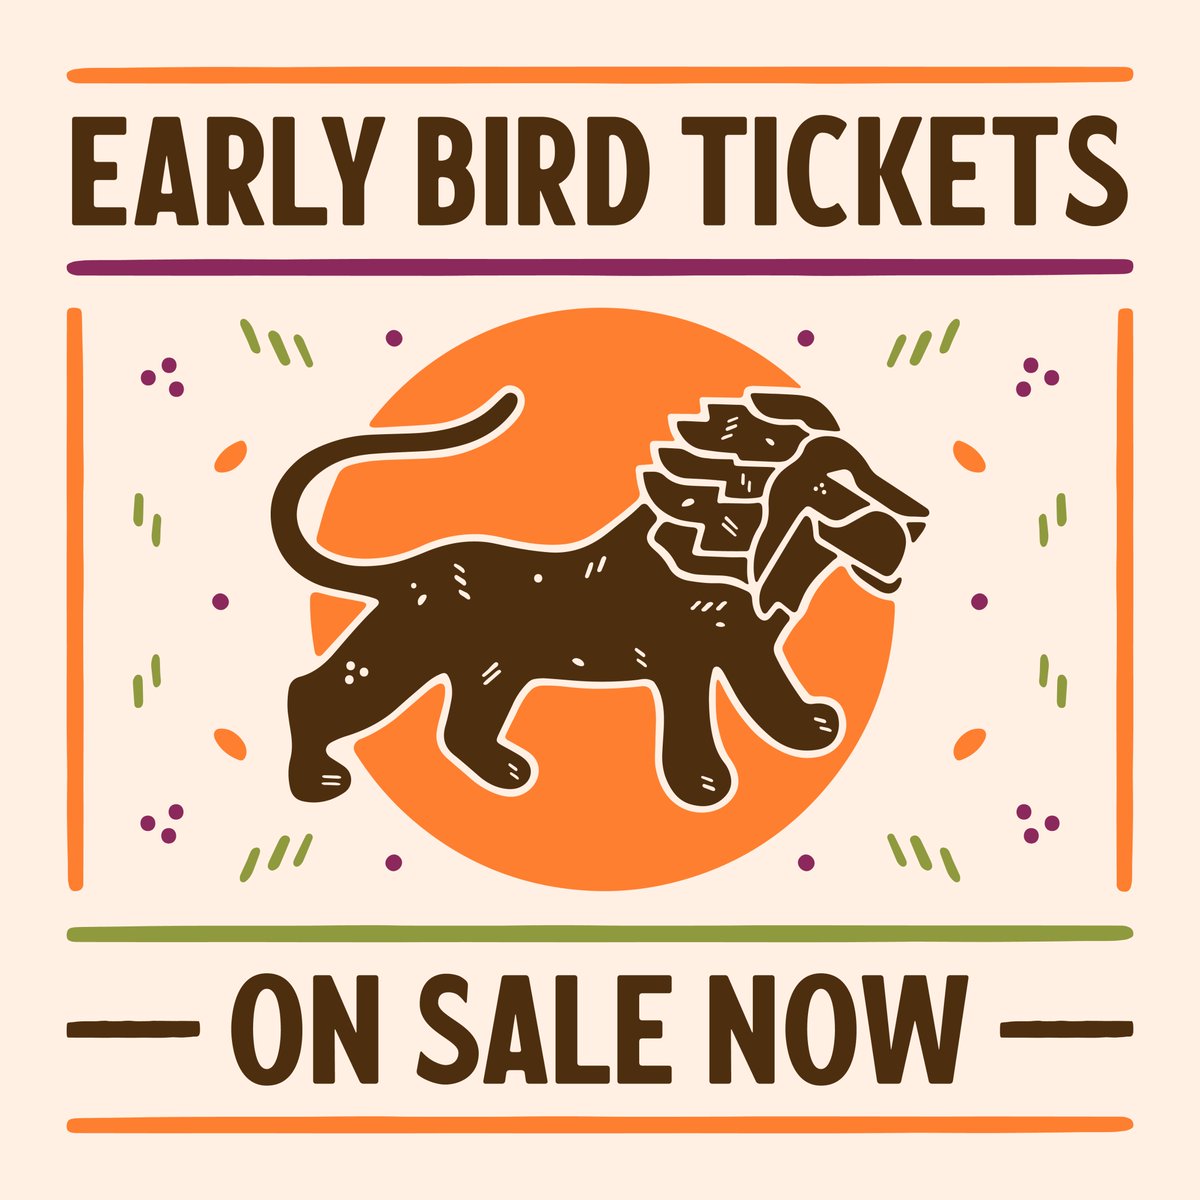 And we're live! WOMADelaide 2024 Early Bird 4 Day and 3 Day tickets are now on sale until 11.59pm Monday, 11 September. Join us as we bring the World Of Music, Arts and Dance to Adelaide's Botanic Park / Tainmuntilla over 08 - 11 March, 2024. Buy now - womadelaide.com.au/tickets